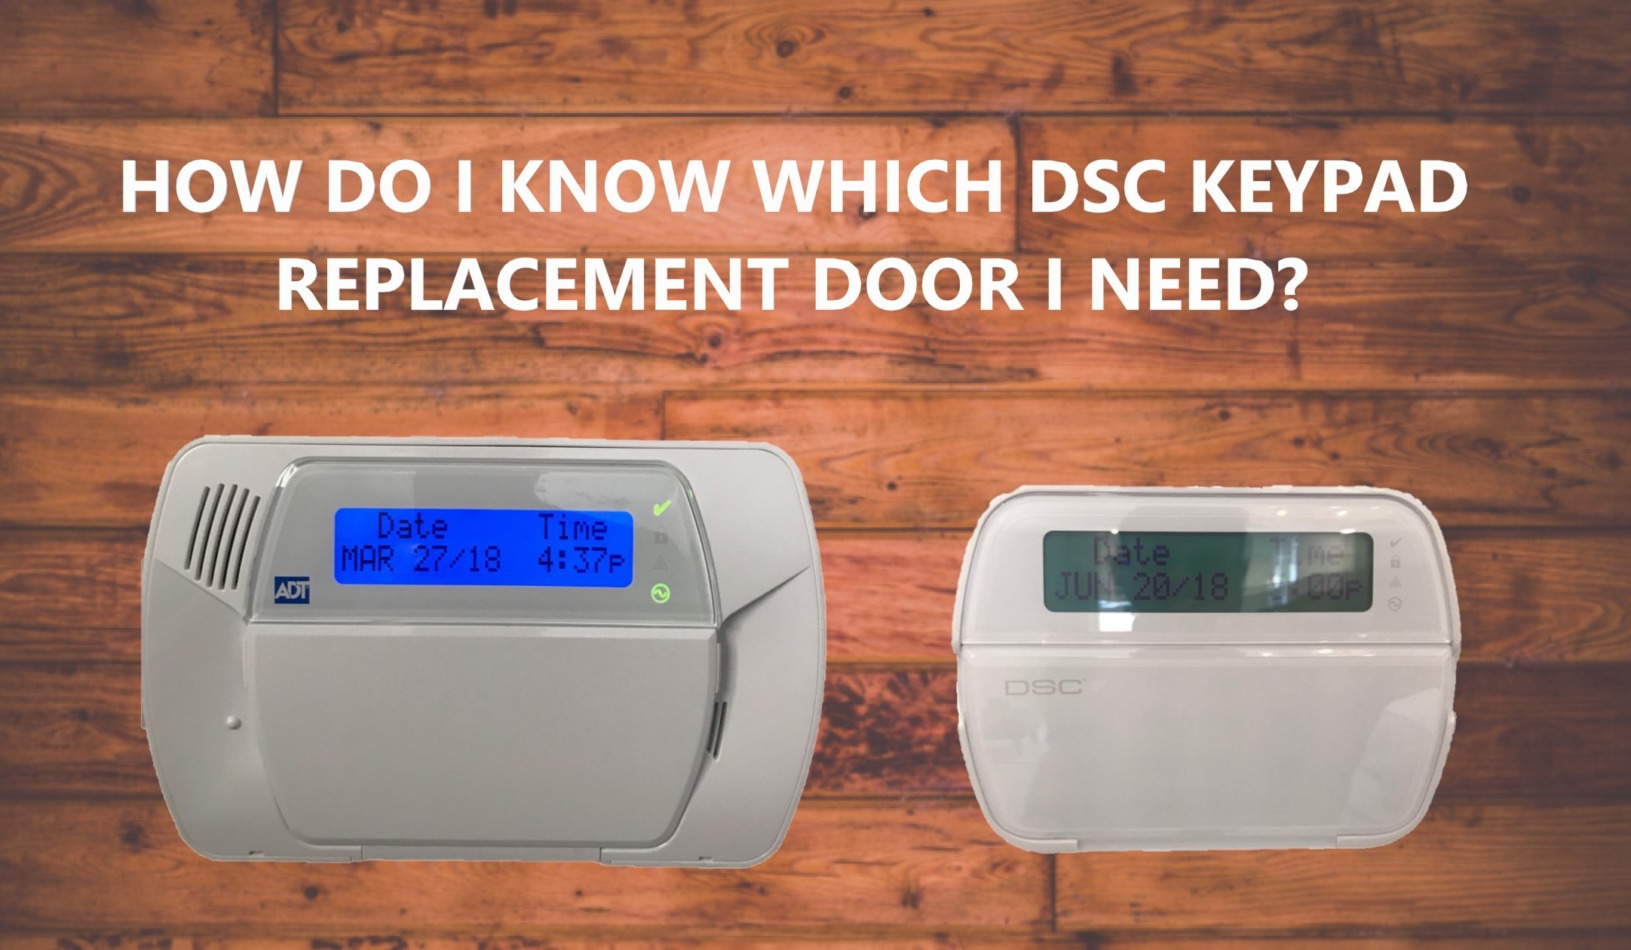 HOW DO I KNOW WHICH DSC KEYPAD REPLACEMENT DOOR I NEED?